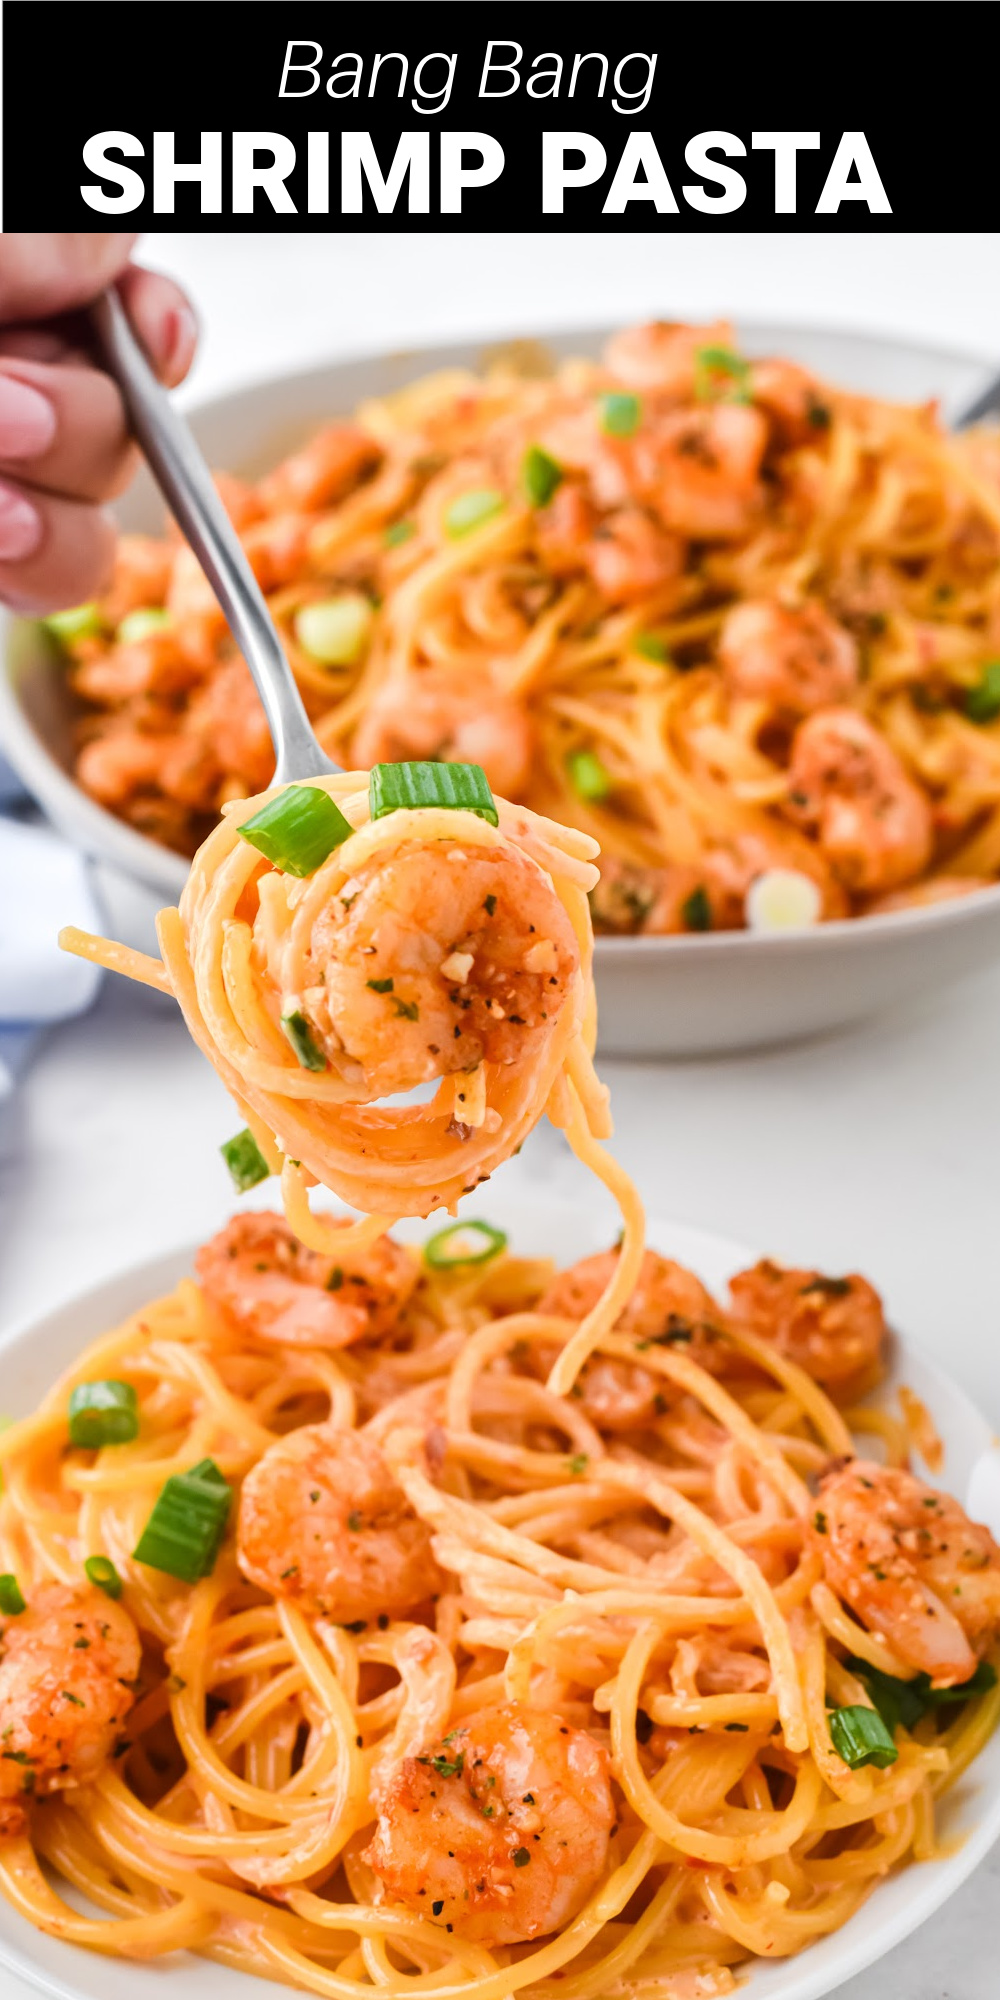 This homemade Bang Bang Shrimp Pasta recipe is a super quick and easy main course meal that’s bursting with the most incredible flavor. Inspired from the famous Bonefish Grill appetizer, this pasta dish with succulent shrimp and creamy sauce has all those same signature flavors the whole family will love.